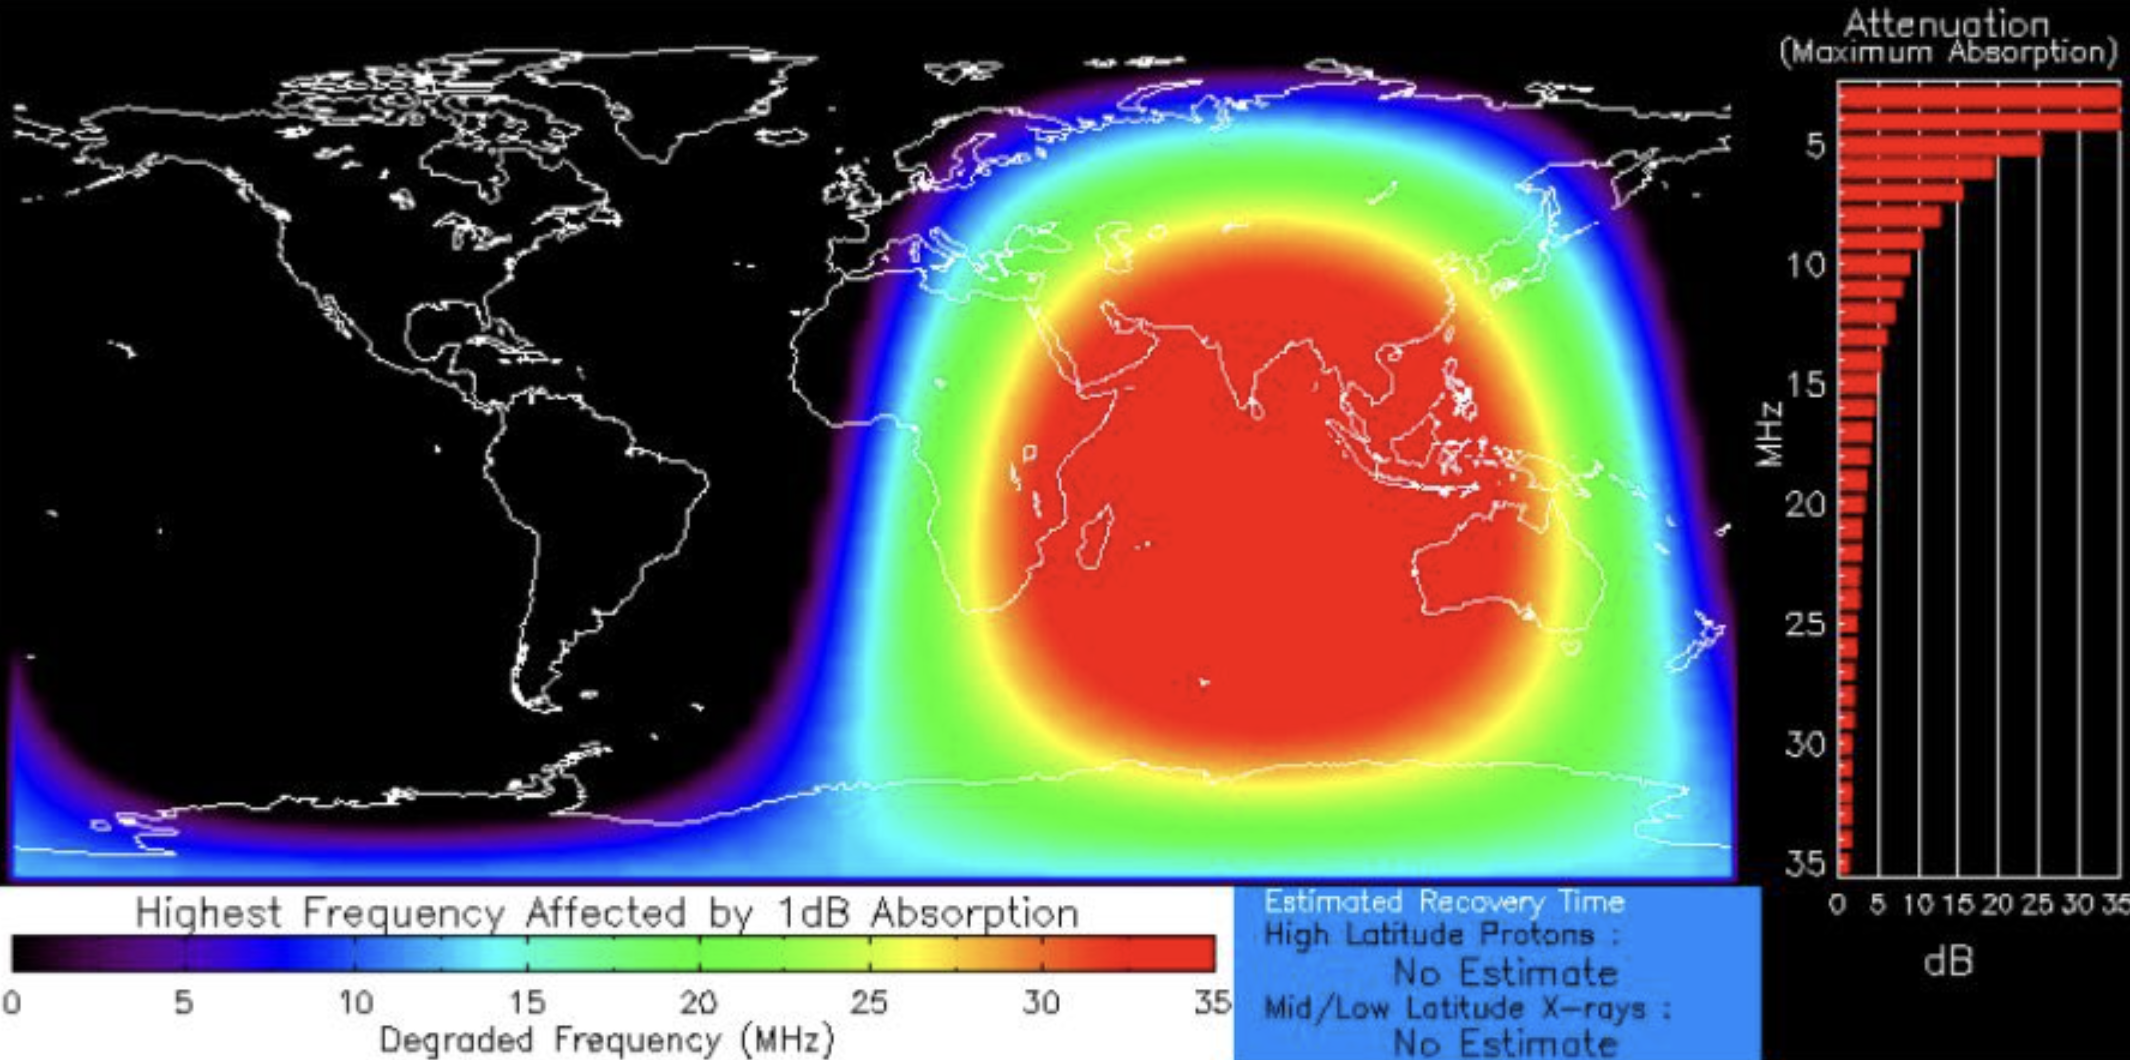 Solar flare activity aligns with cellular outage, unlikely the cause